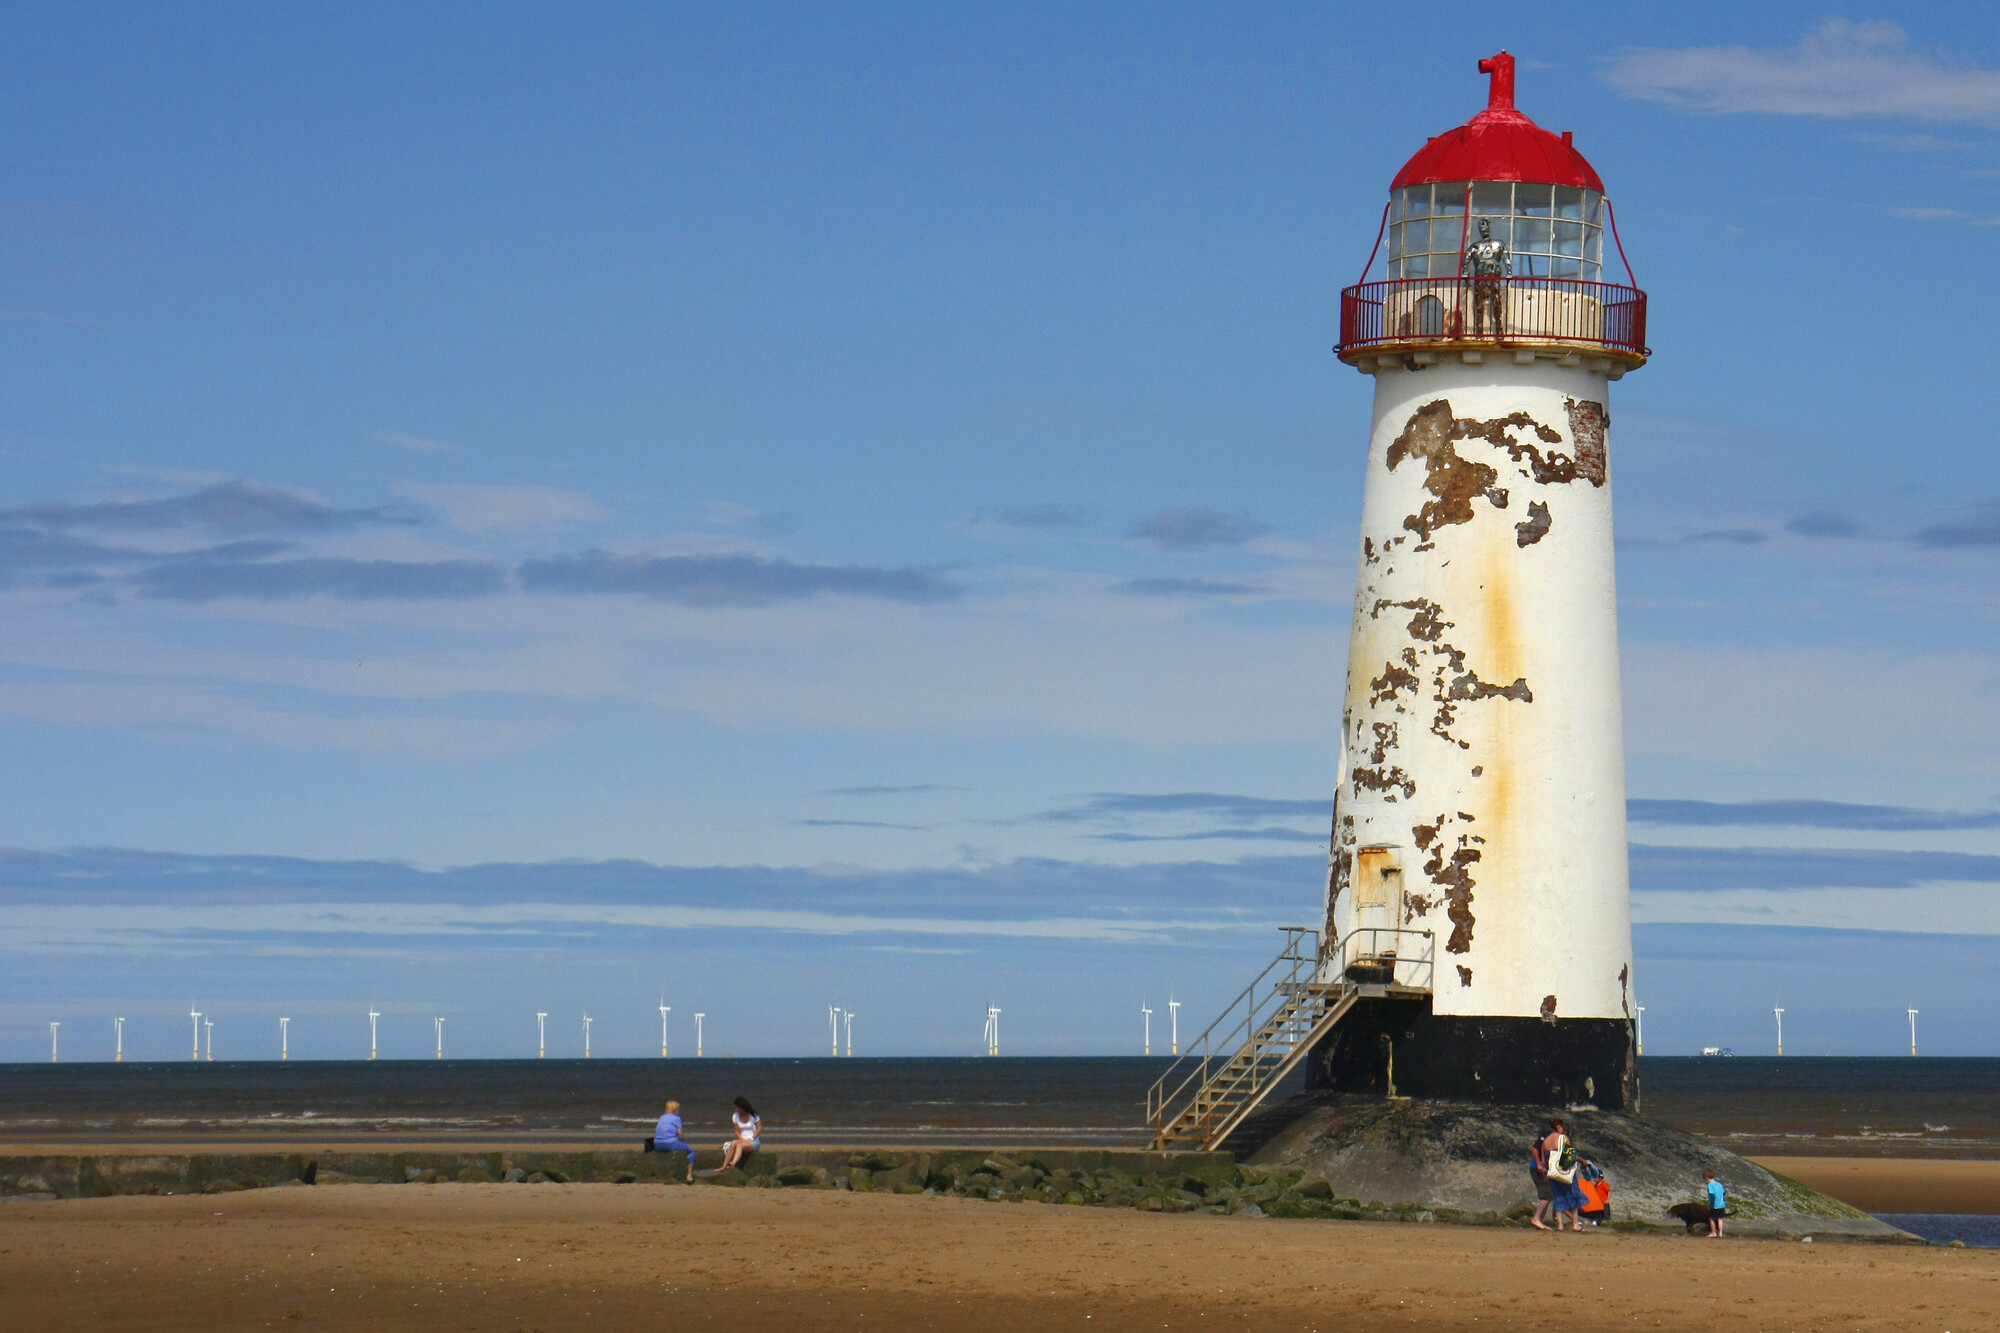 photographer WPNPHOTOIMAGES architecture  photo taken at Talacre, North Wales